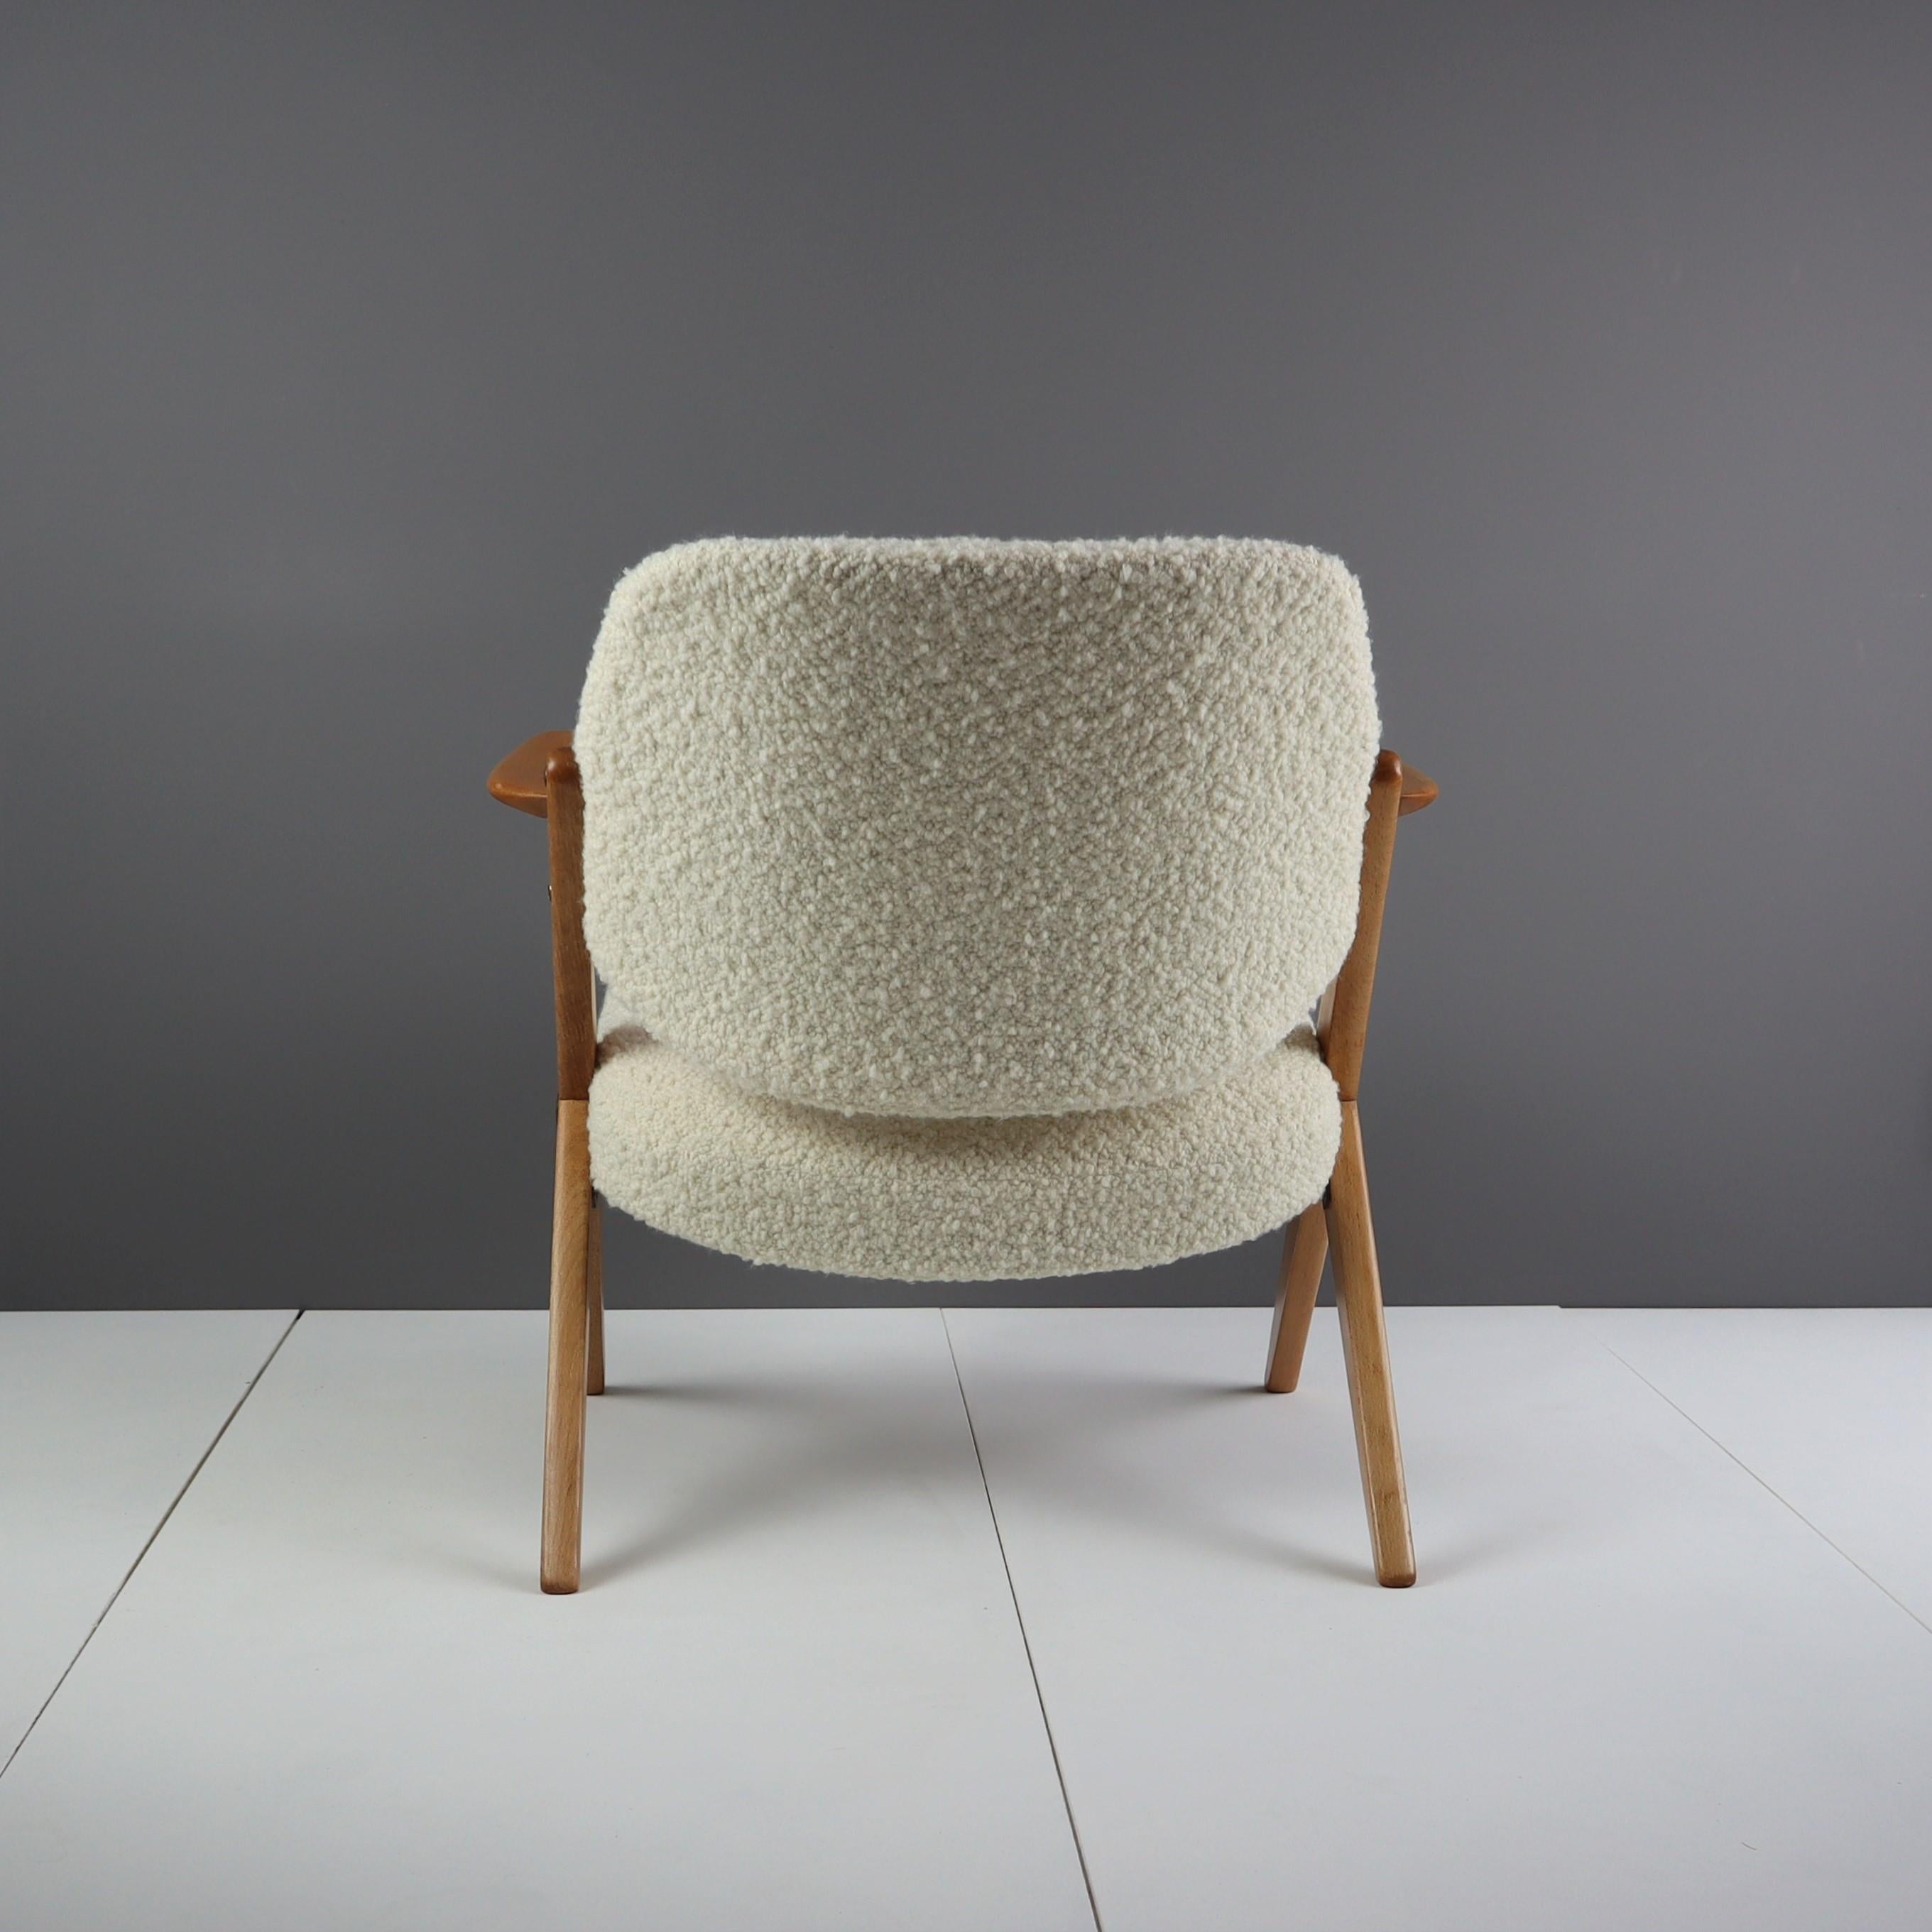 Rare Pair of Mid-century Triva armchairs by Bengt Ruda For Sale at 1stDibs